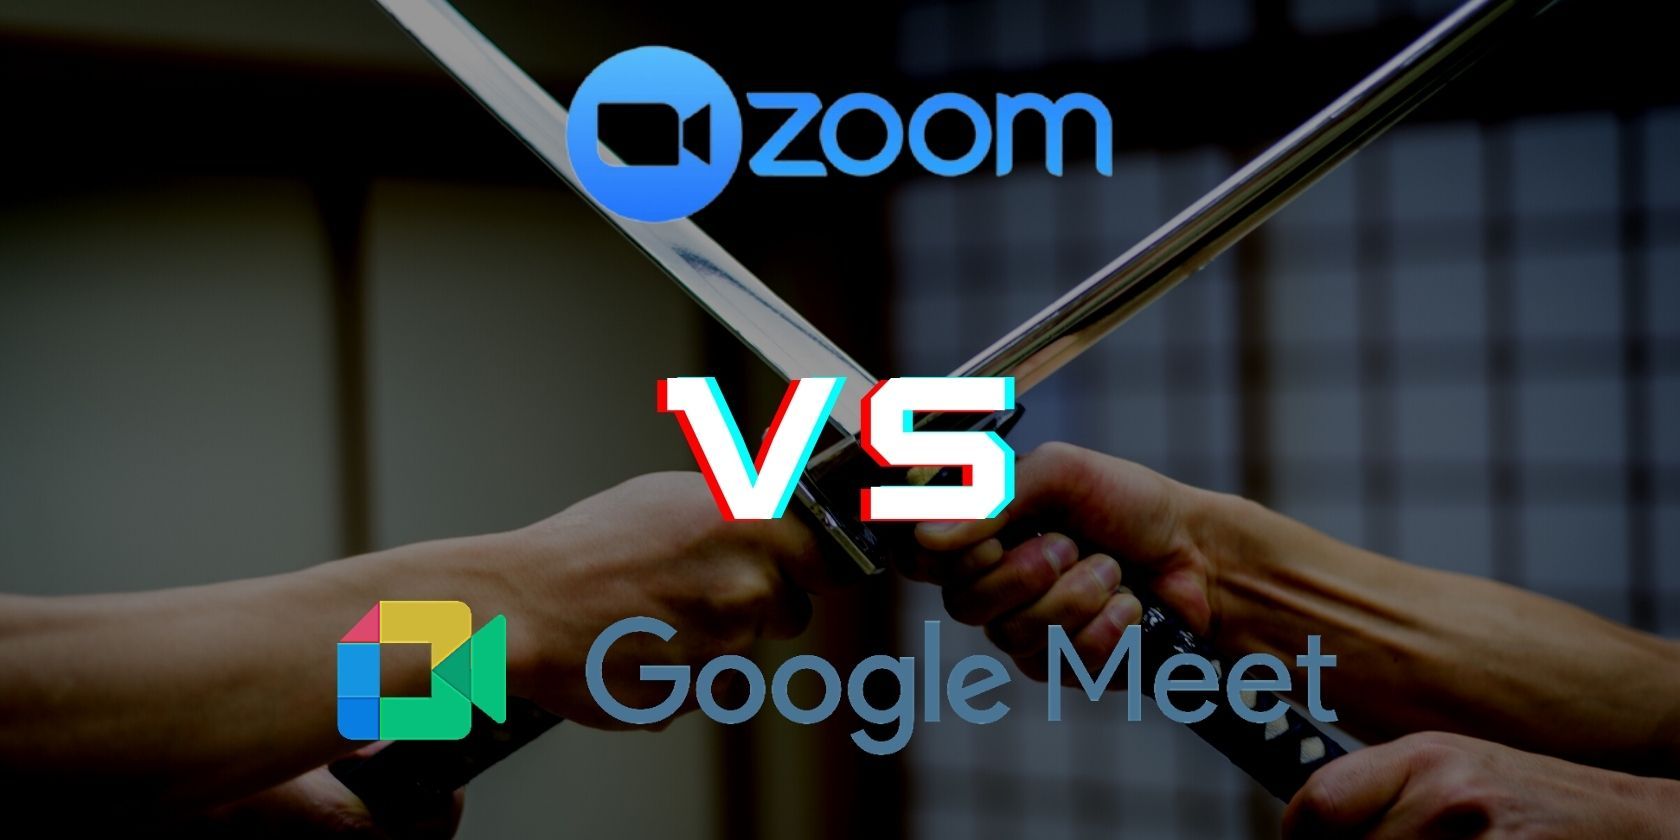 how much data does a zoom conference call use